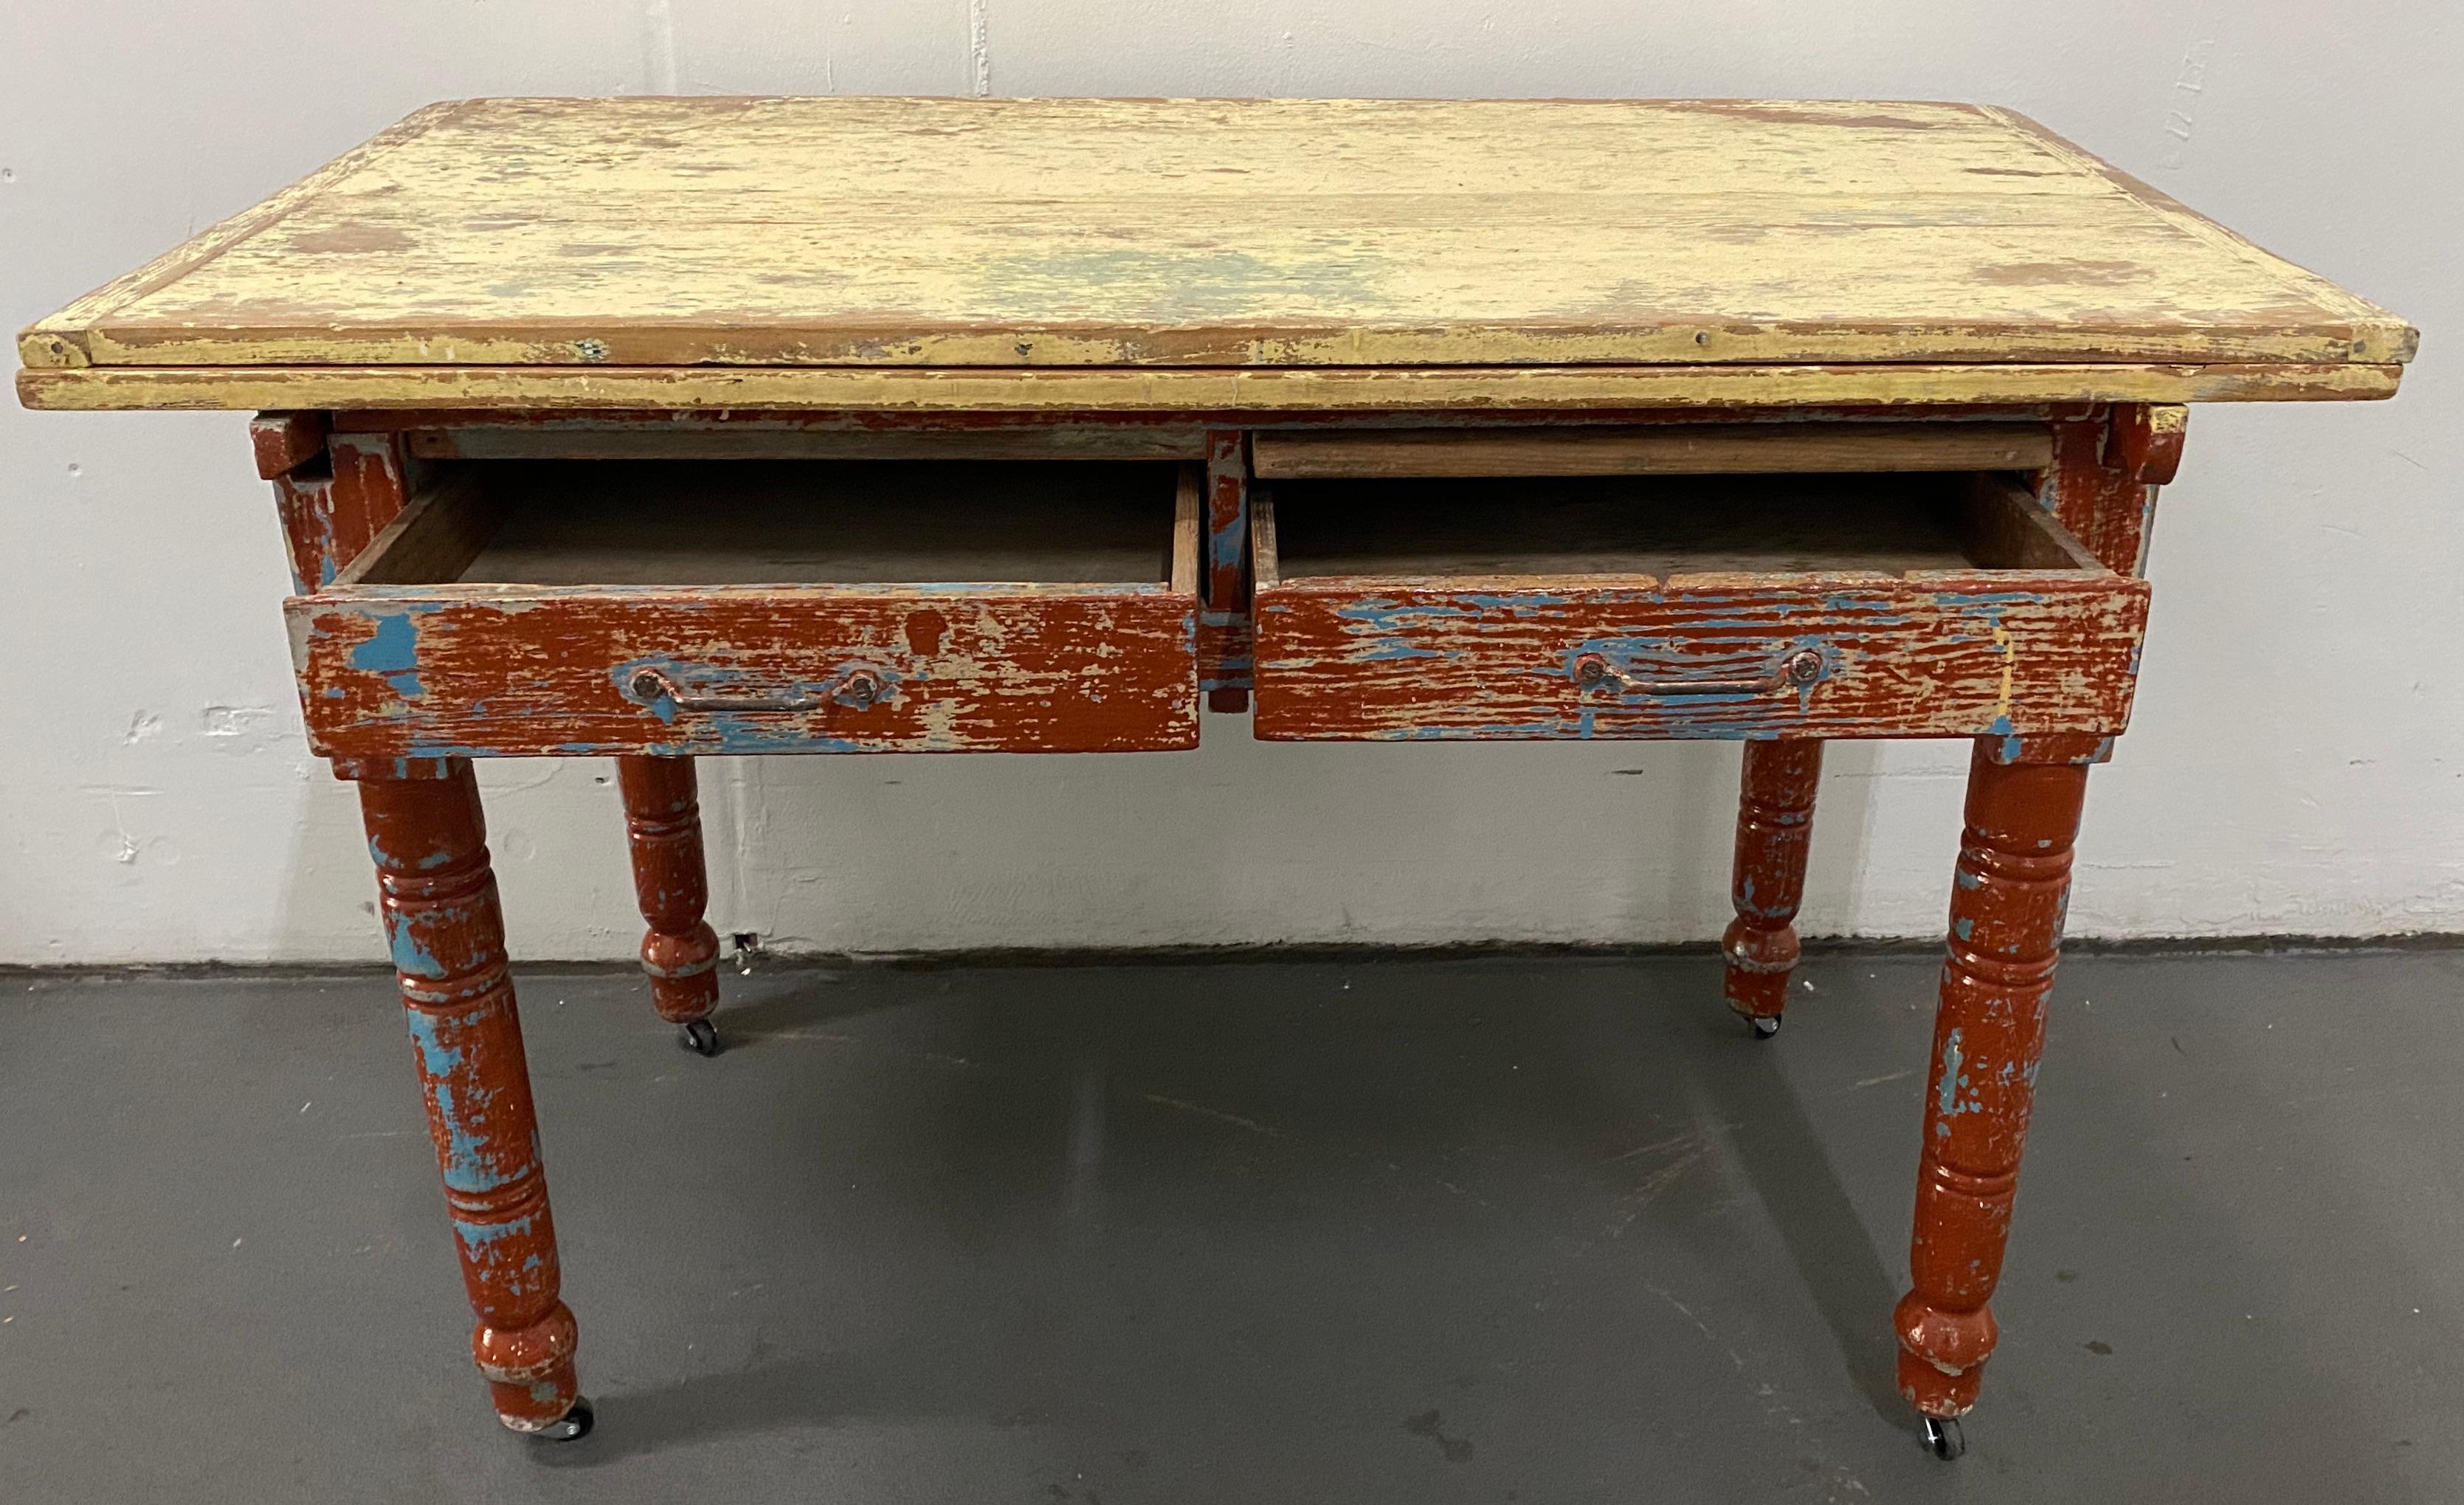 Vintage painted table with two drawers and turned legs, circa 1930

This is a custom made table made from Pine. Turned legs, two drawers, a pull-out shelf and a stacked double board surface.

This would make a great kitchen counter, work desk,